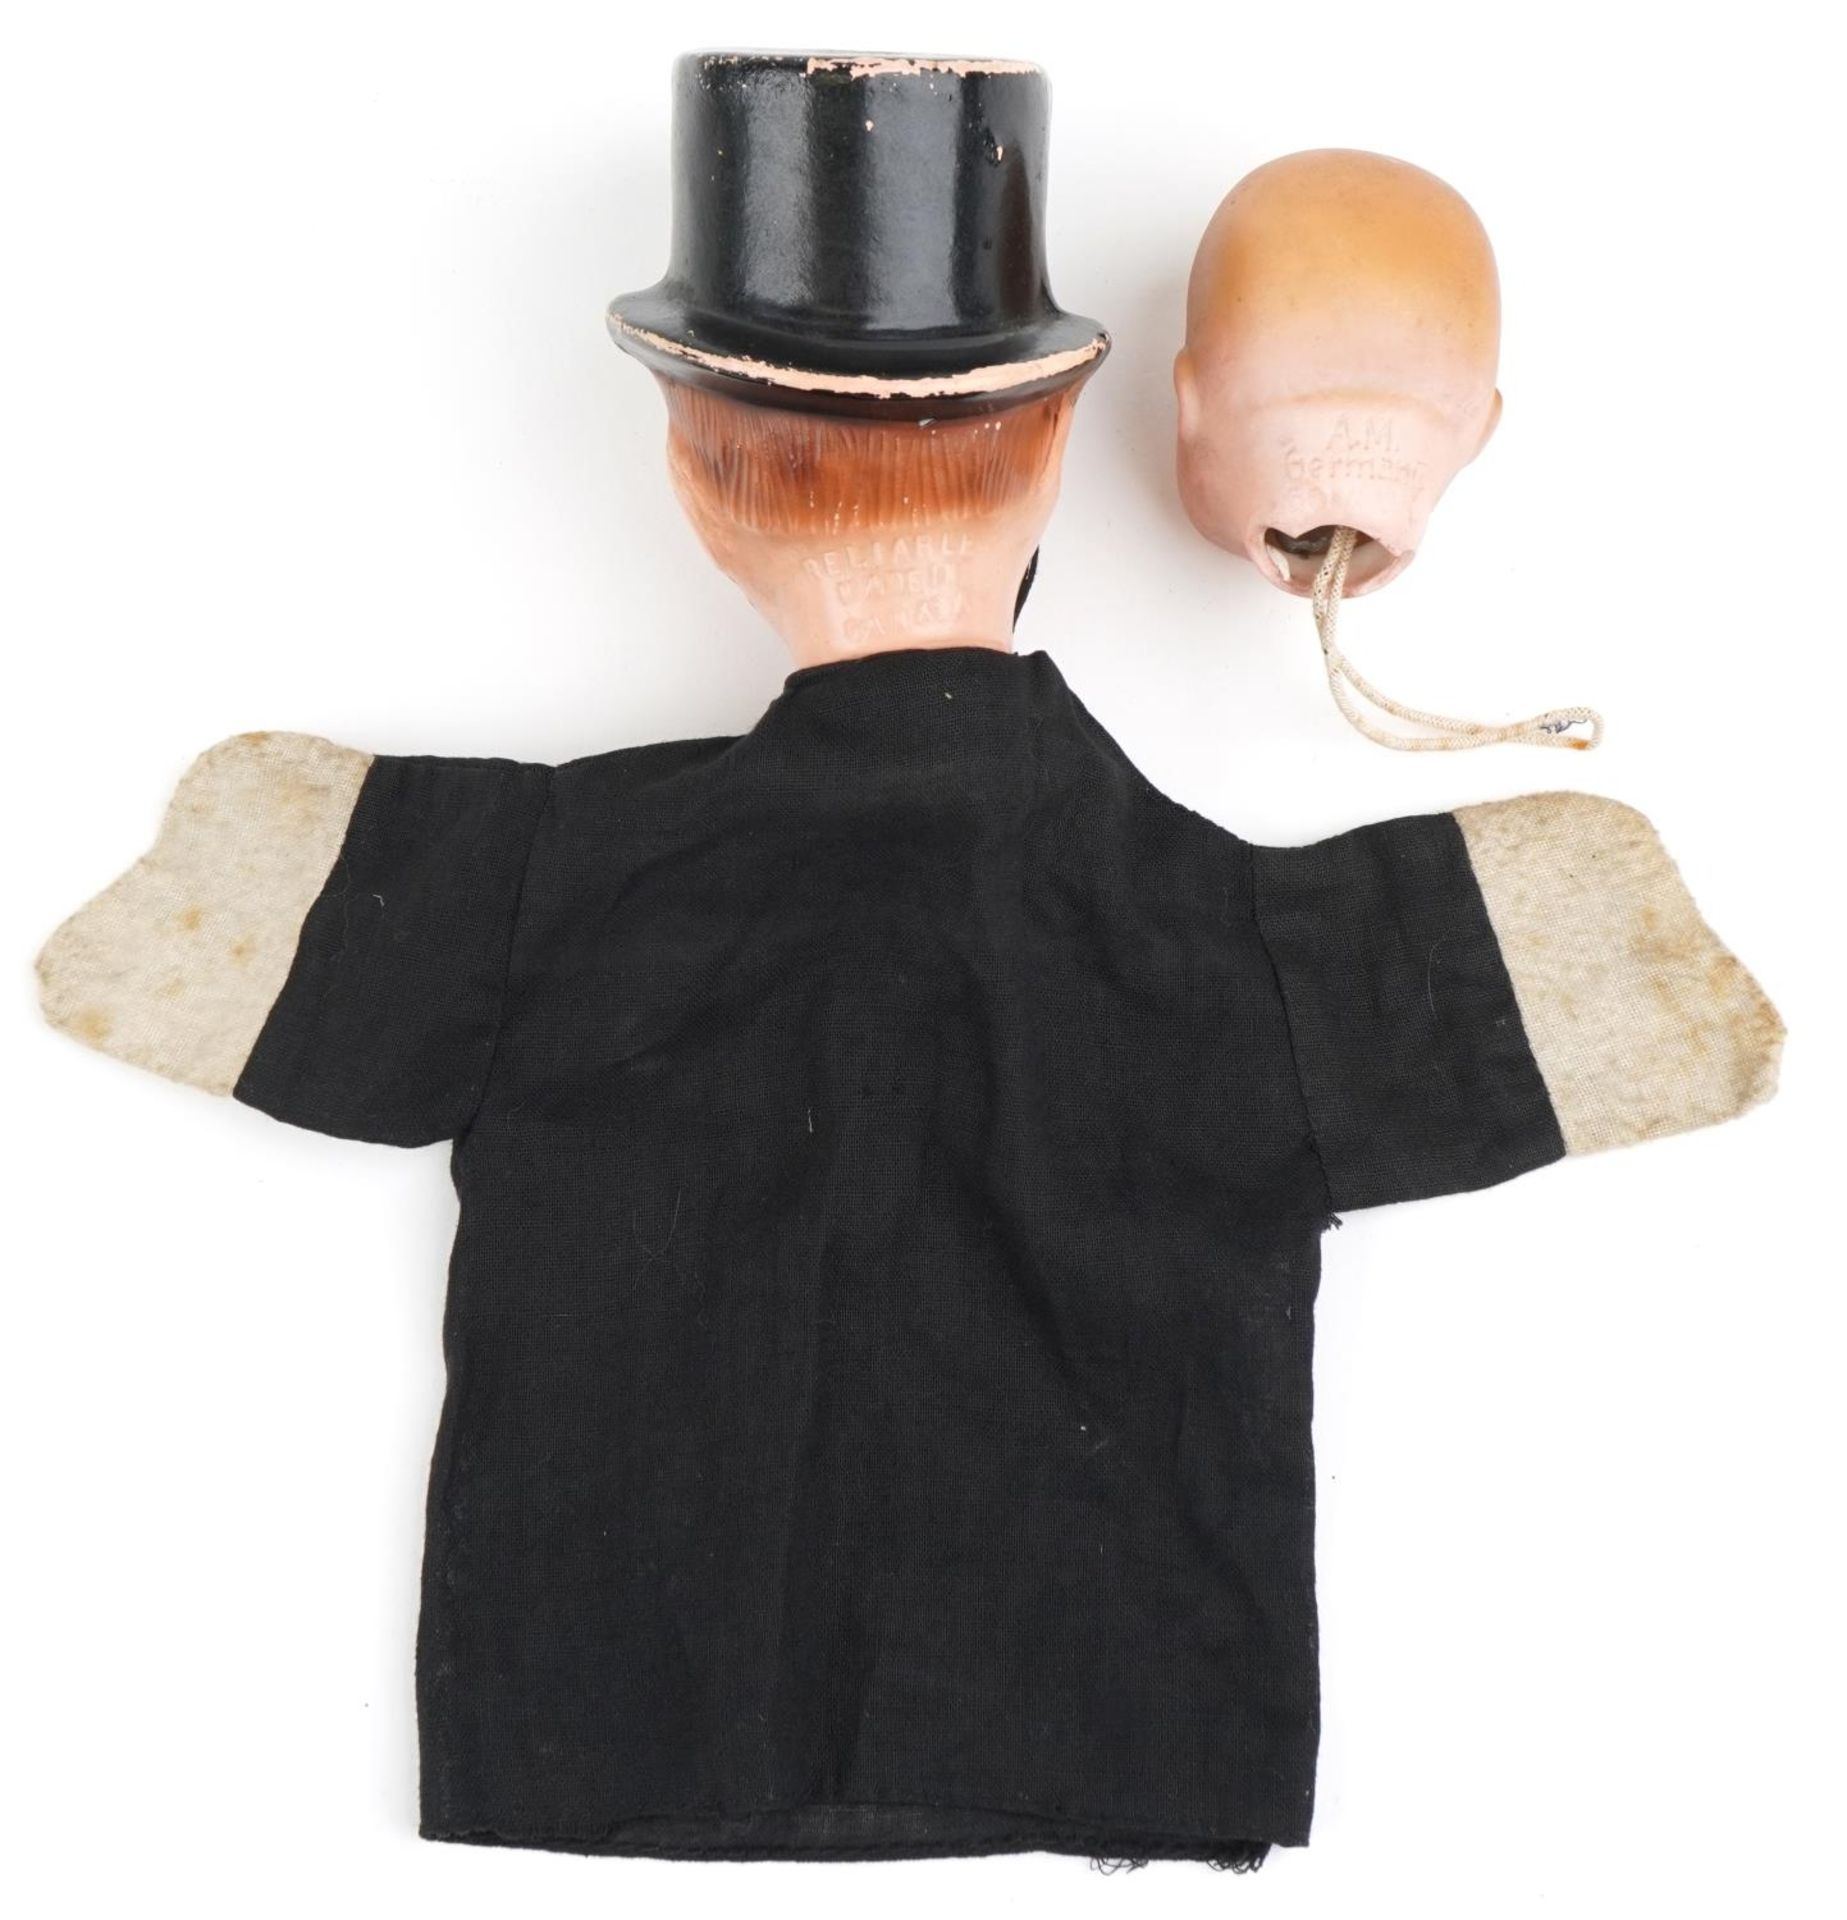 Vintage Edgar's Bergen's Charlie McCarthy glove puppet and an Armand Marseille bisque doll's head, - Image 3 of 5